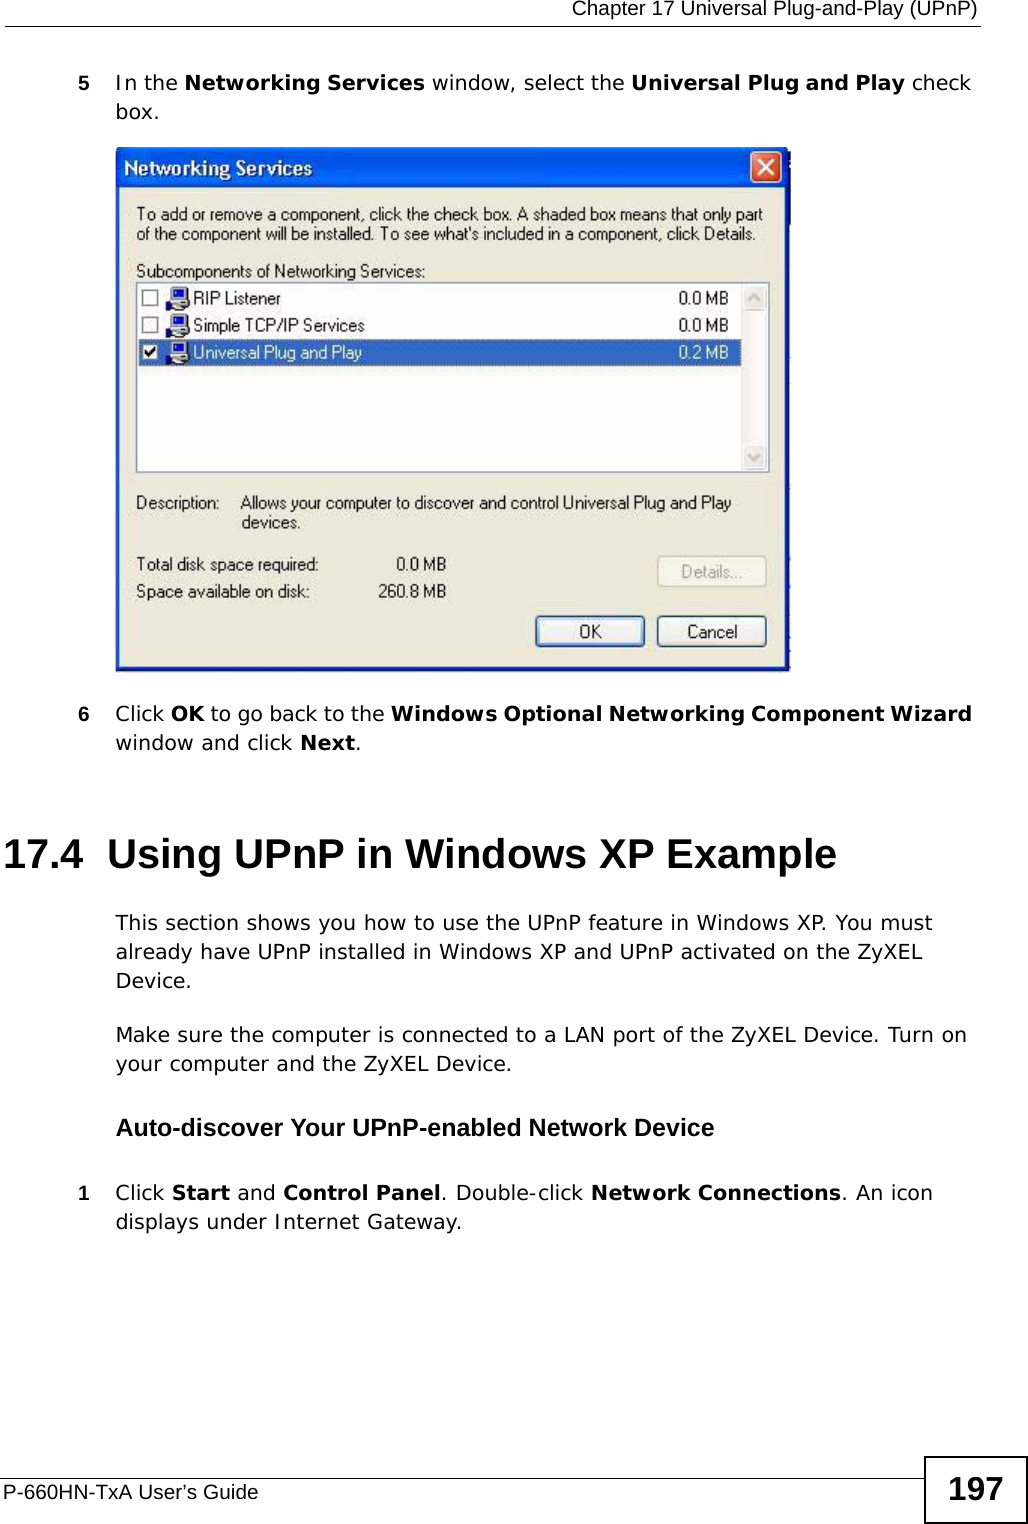  Chapter 17 Universal Plug-and-Play (UPnP)P-660HN-TxA User’s Guide 1975In the Networking Services window, select the Universal Plug and Play check box. Networking Services6Click OK to go back to the Windows Optional Networking Component Wizard window and click Next. 17.4  Using UPnP in Windows XP ExampleThis section shows you how to use the UPnP feature in Windows XP. You must already have UPnP installed in Windows XP and UPnP activated on the ZyXEL Device.Make sure the computer is connected to a LAN port of the ZyXEL Device. Turn on your computer and the ZyXEL Device. Auto-discover Your UPnP-enabled Network Device1Click Start and Control Panel. Double-click Network Connections. An icon displays under Internet Gateway.